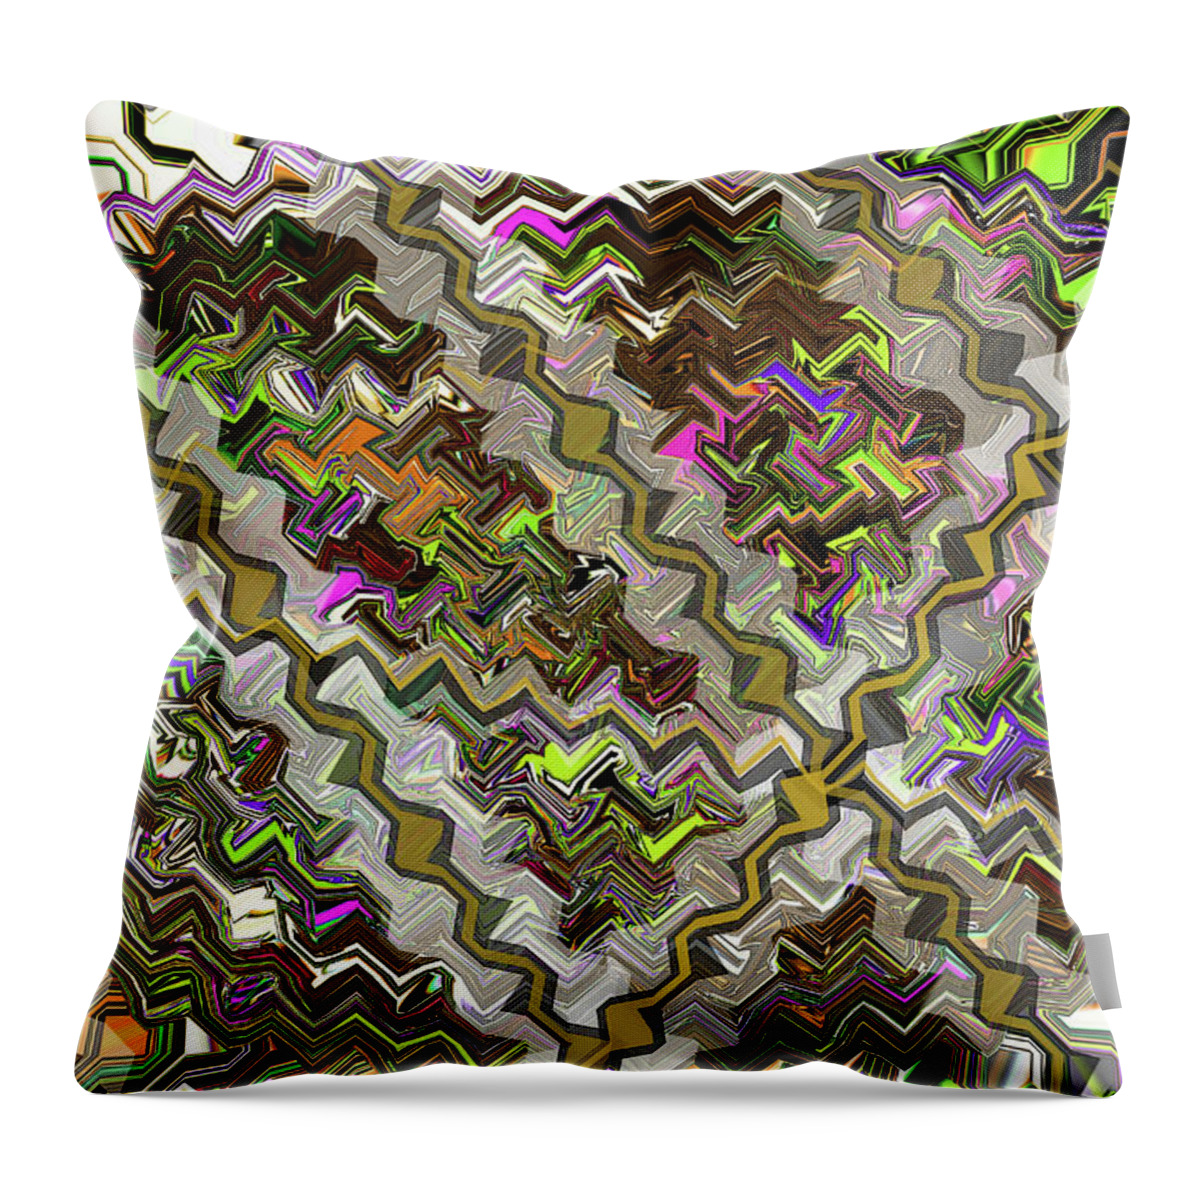 Janca Drawing Abstract #2557ew7bcde Throw Pillow featuring the digital art Janca Drawing Abstract #2557ew7bcde by Tom Janca